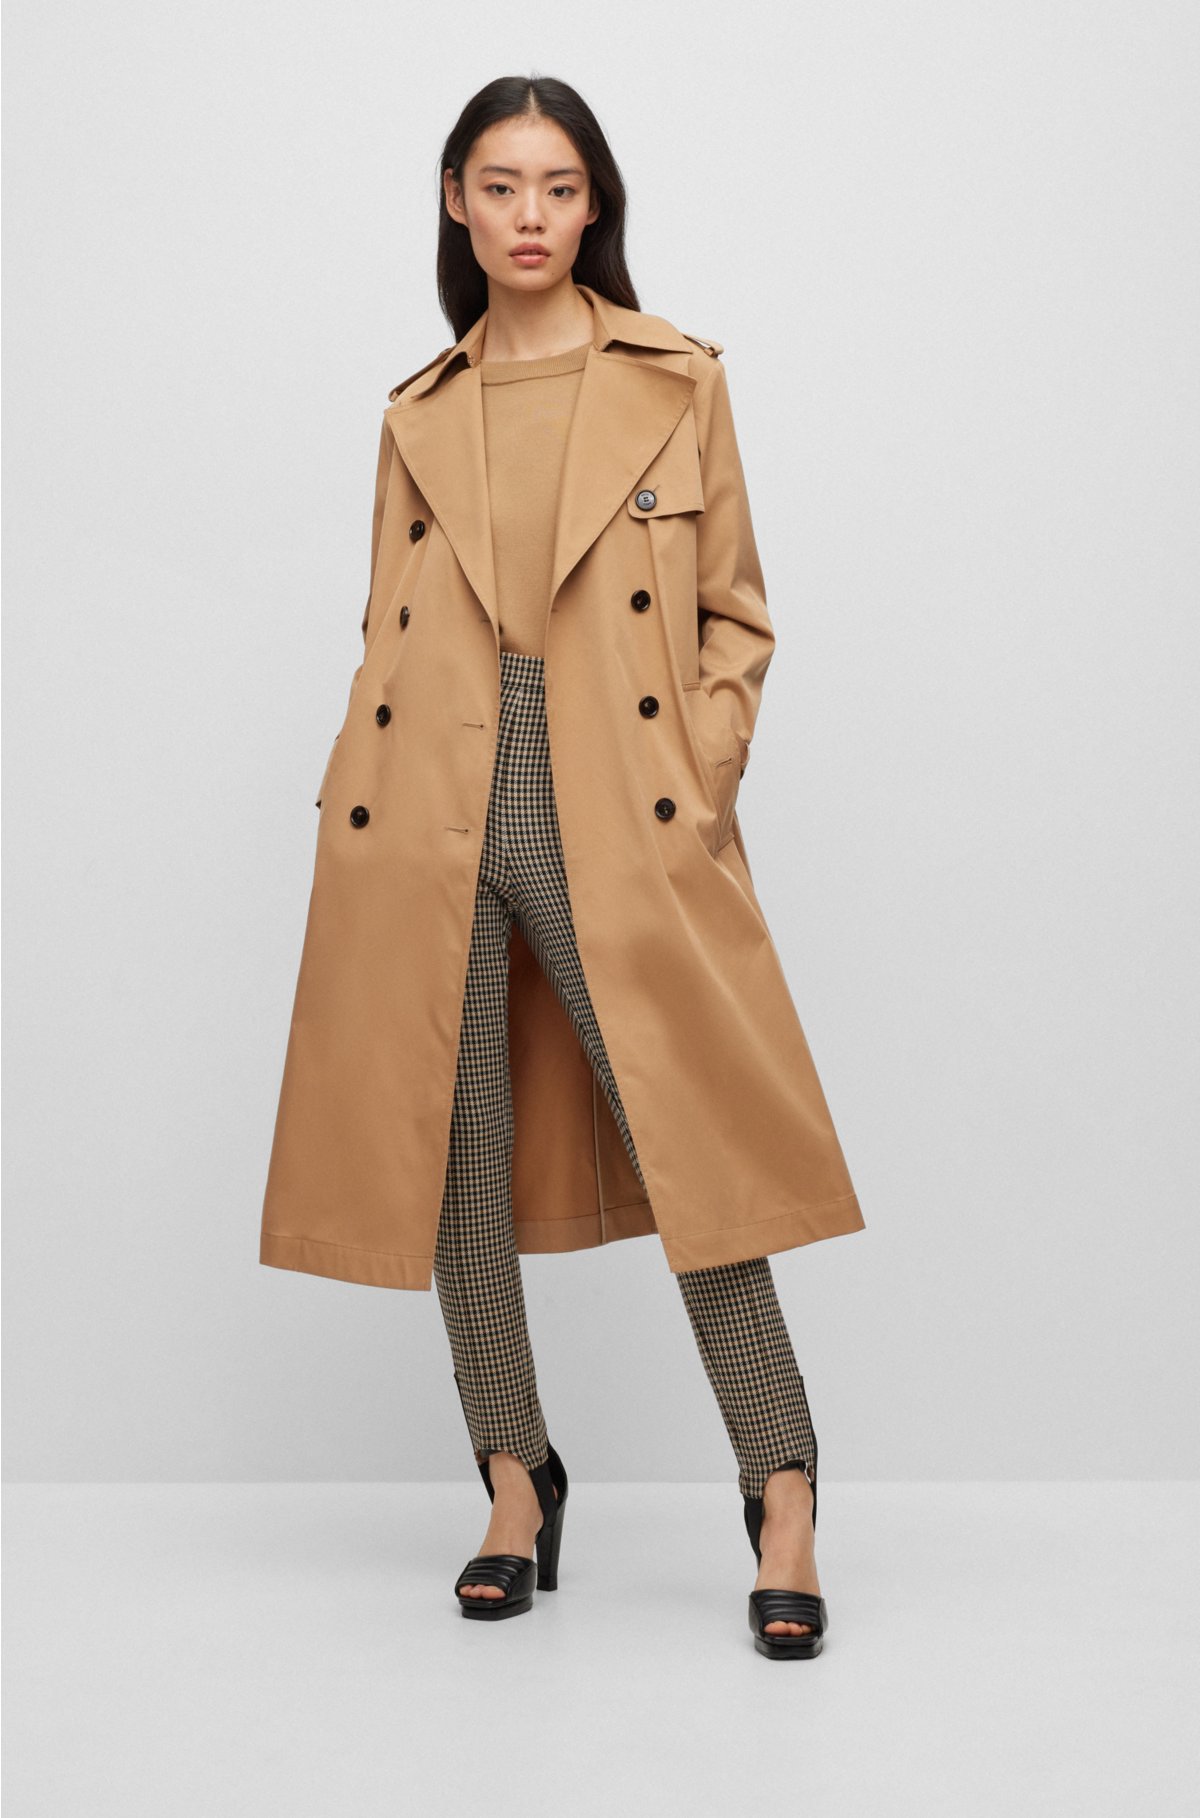 Women's Spring Off Shoulder Trench  Trench coat dress, Fashion, Trench  dress